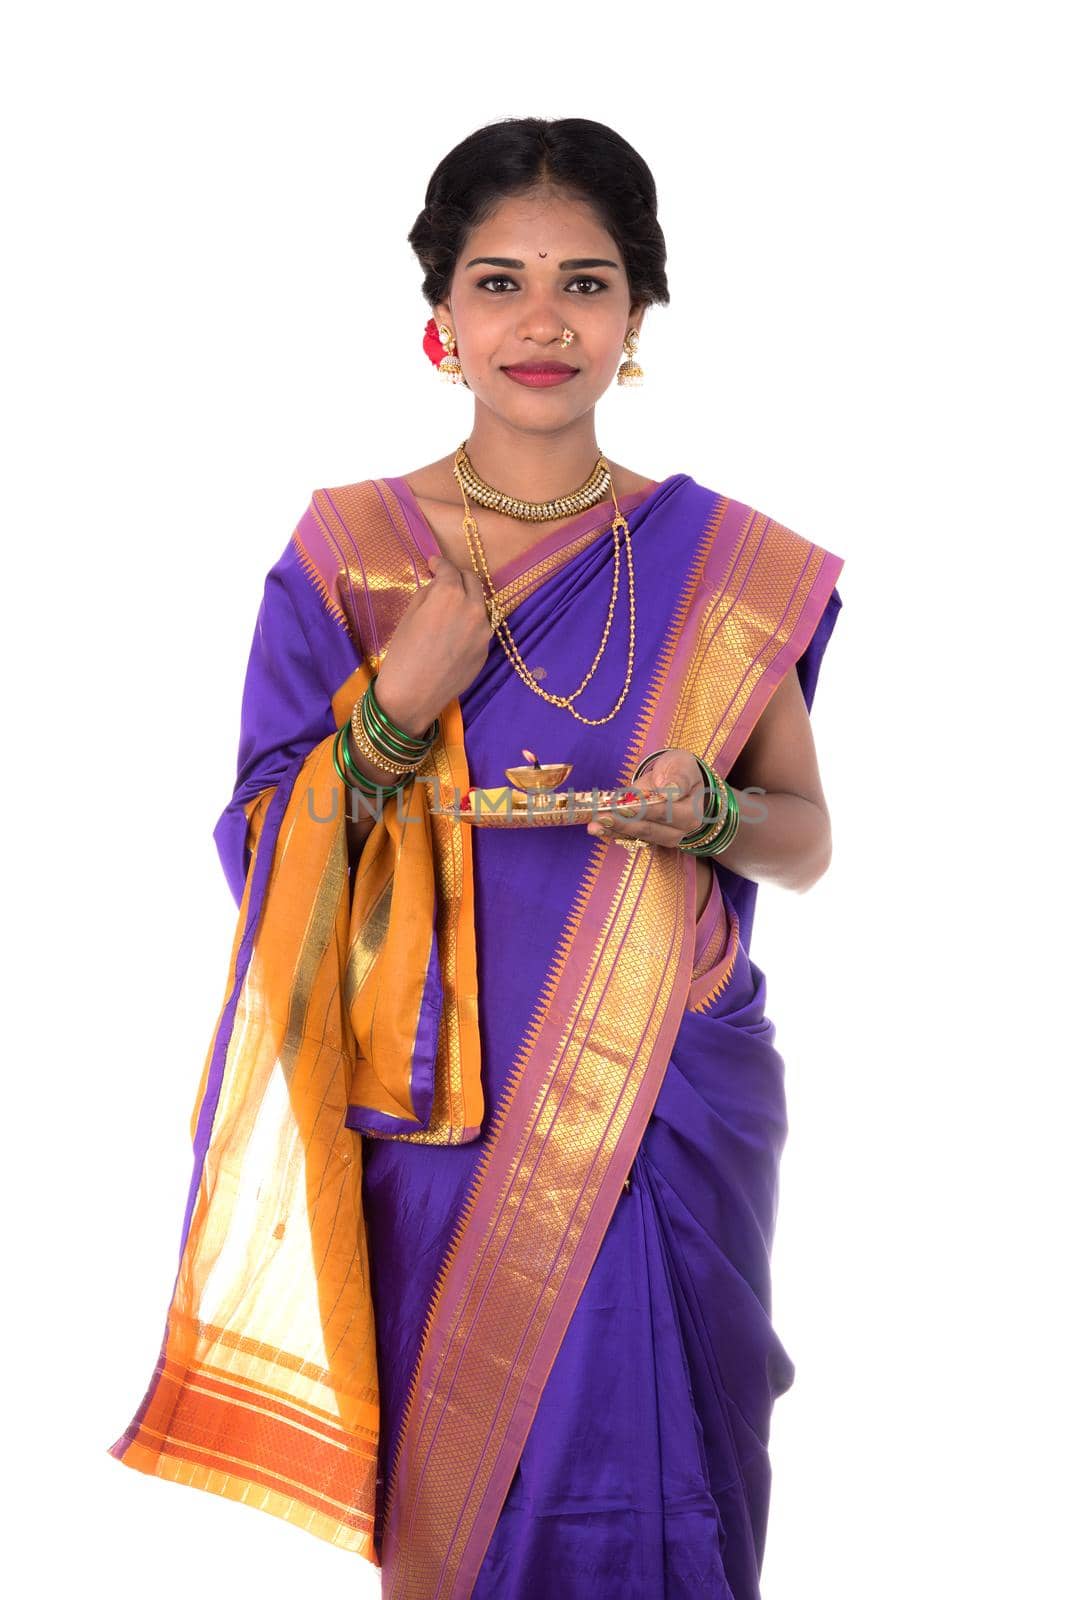 Indian woman performing worship, portrait of a beautiful young lady with pooja thali isolated on white background